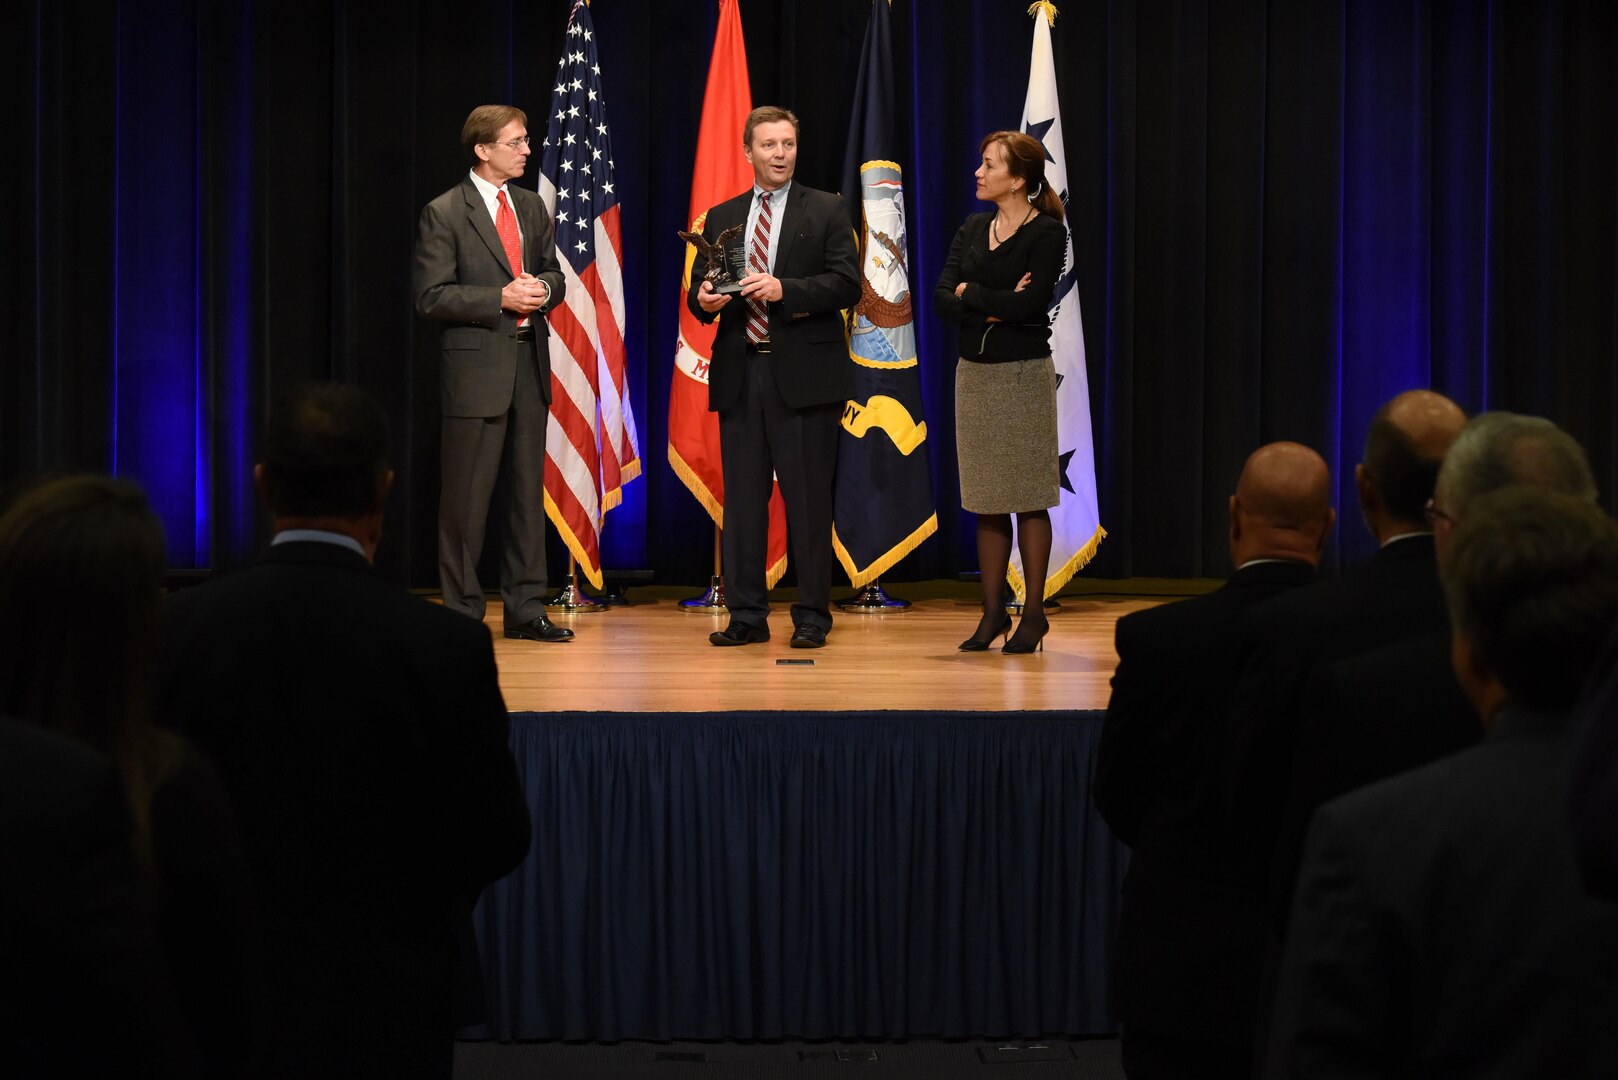 Assistant Secretary of the Navy (Research, Development and Acquisition) Sean Stackley (left) presented Naval Sea Systems Command’s Mike Gutermuth the Rear Admiral Wayne E. Meyer Memorial Award as Janine Anne Davidson, Under Secretary of the United States Navy looks on during the 2016 Department of the Navy Acquisition Excellence Awards at the Pentagon, Nov. 17. 
